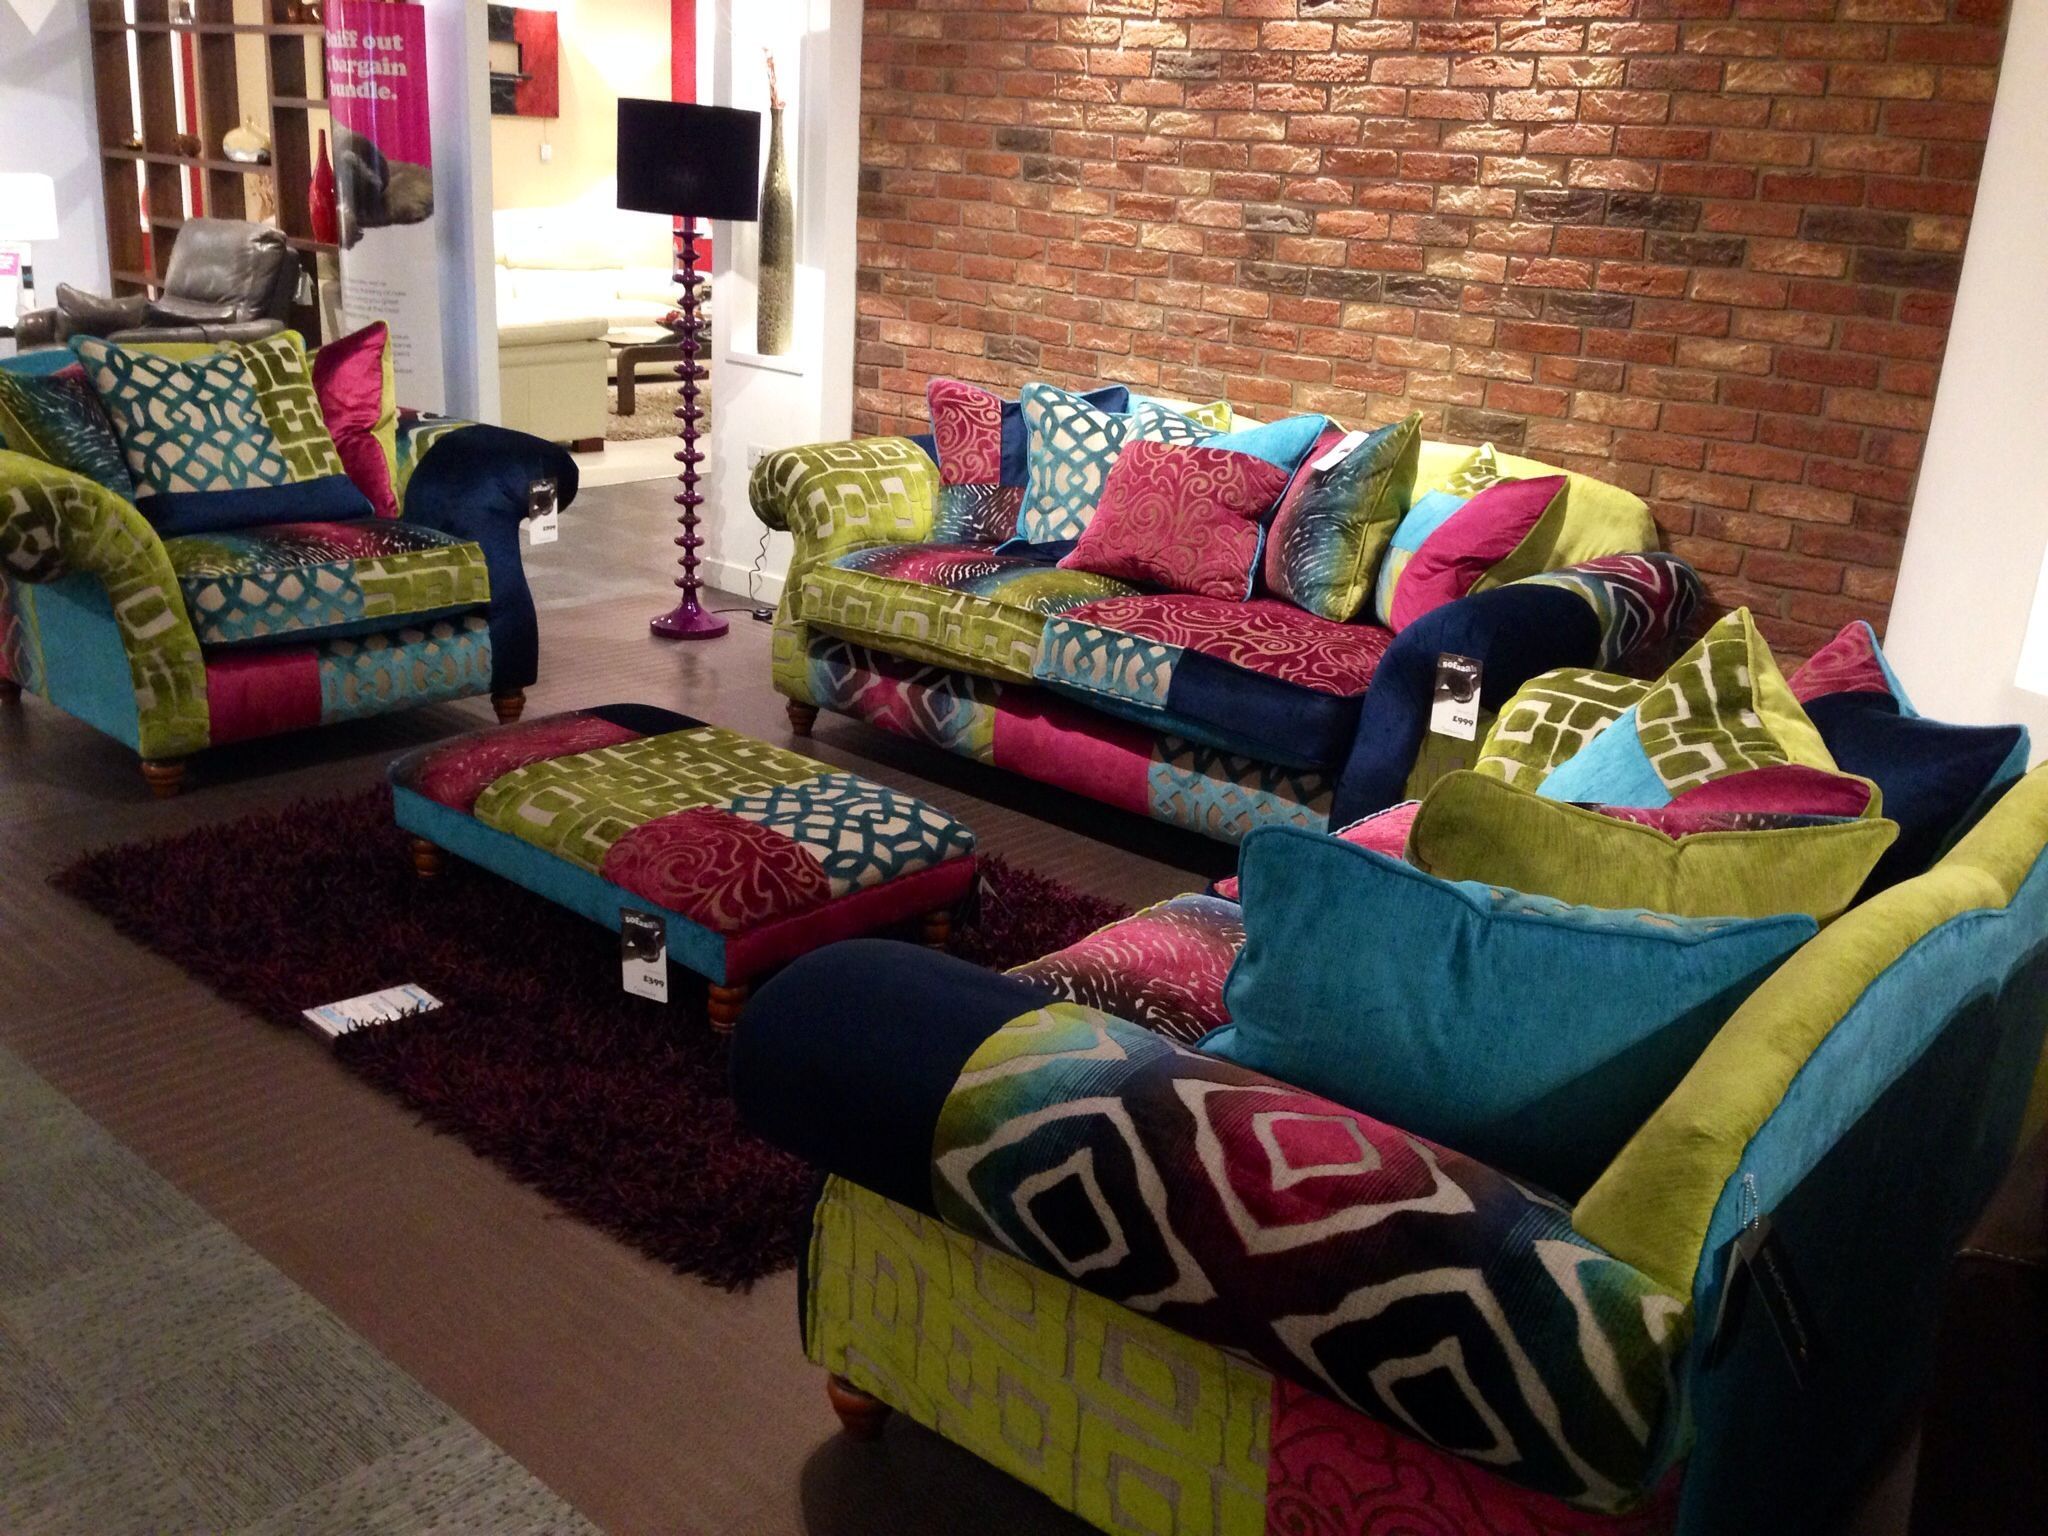 7 Images Multi Coloured Sofas And Review – Alqu Blog Within Sofas In Multiple Colors (View 4 of 20)